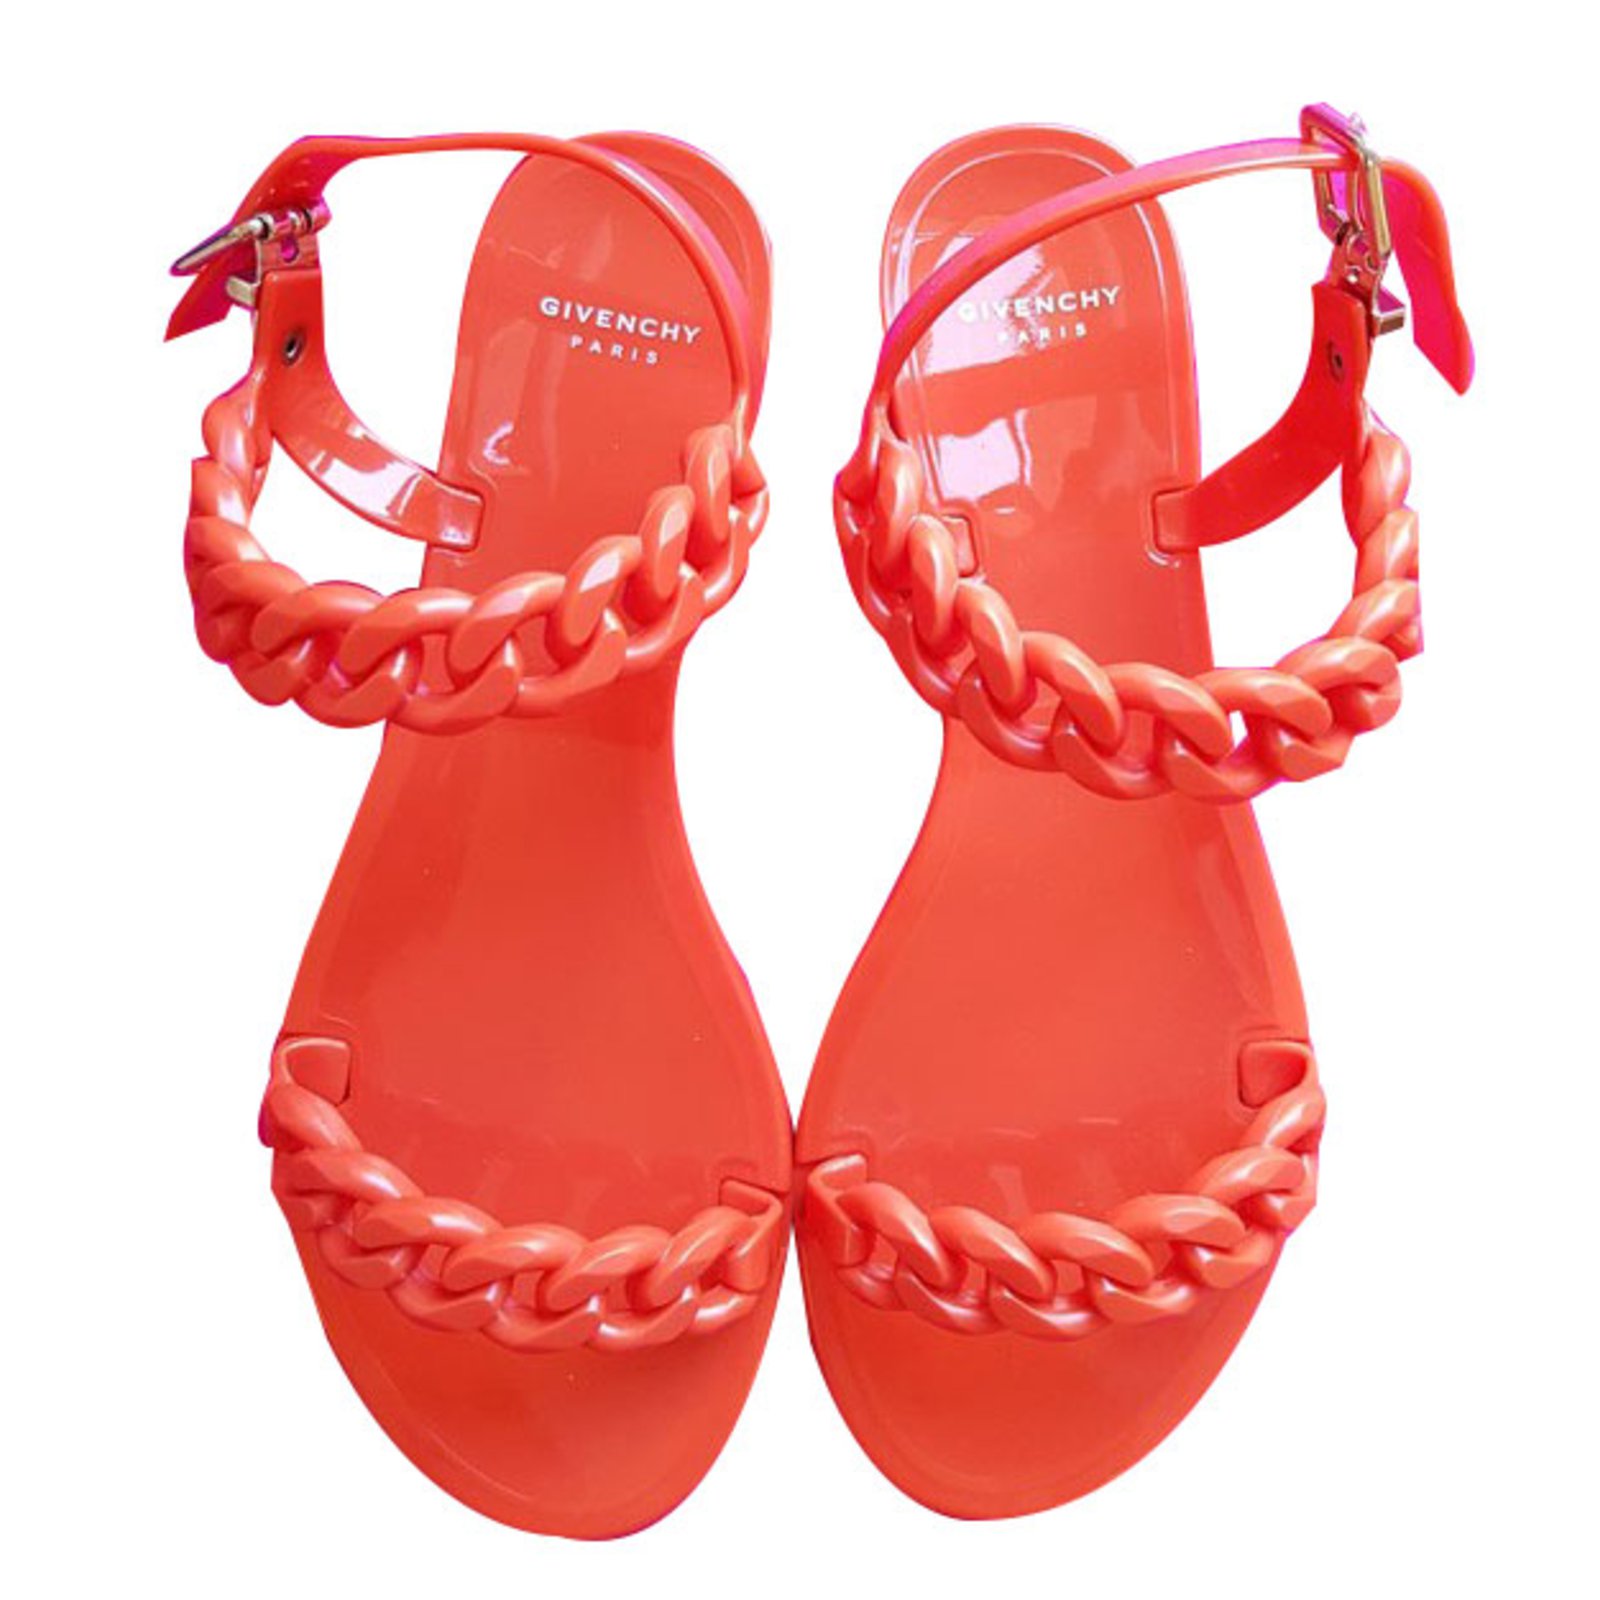 Givenchy Jelly Sandals Rubber Orange 